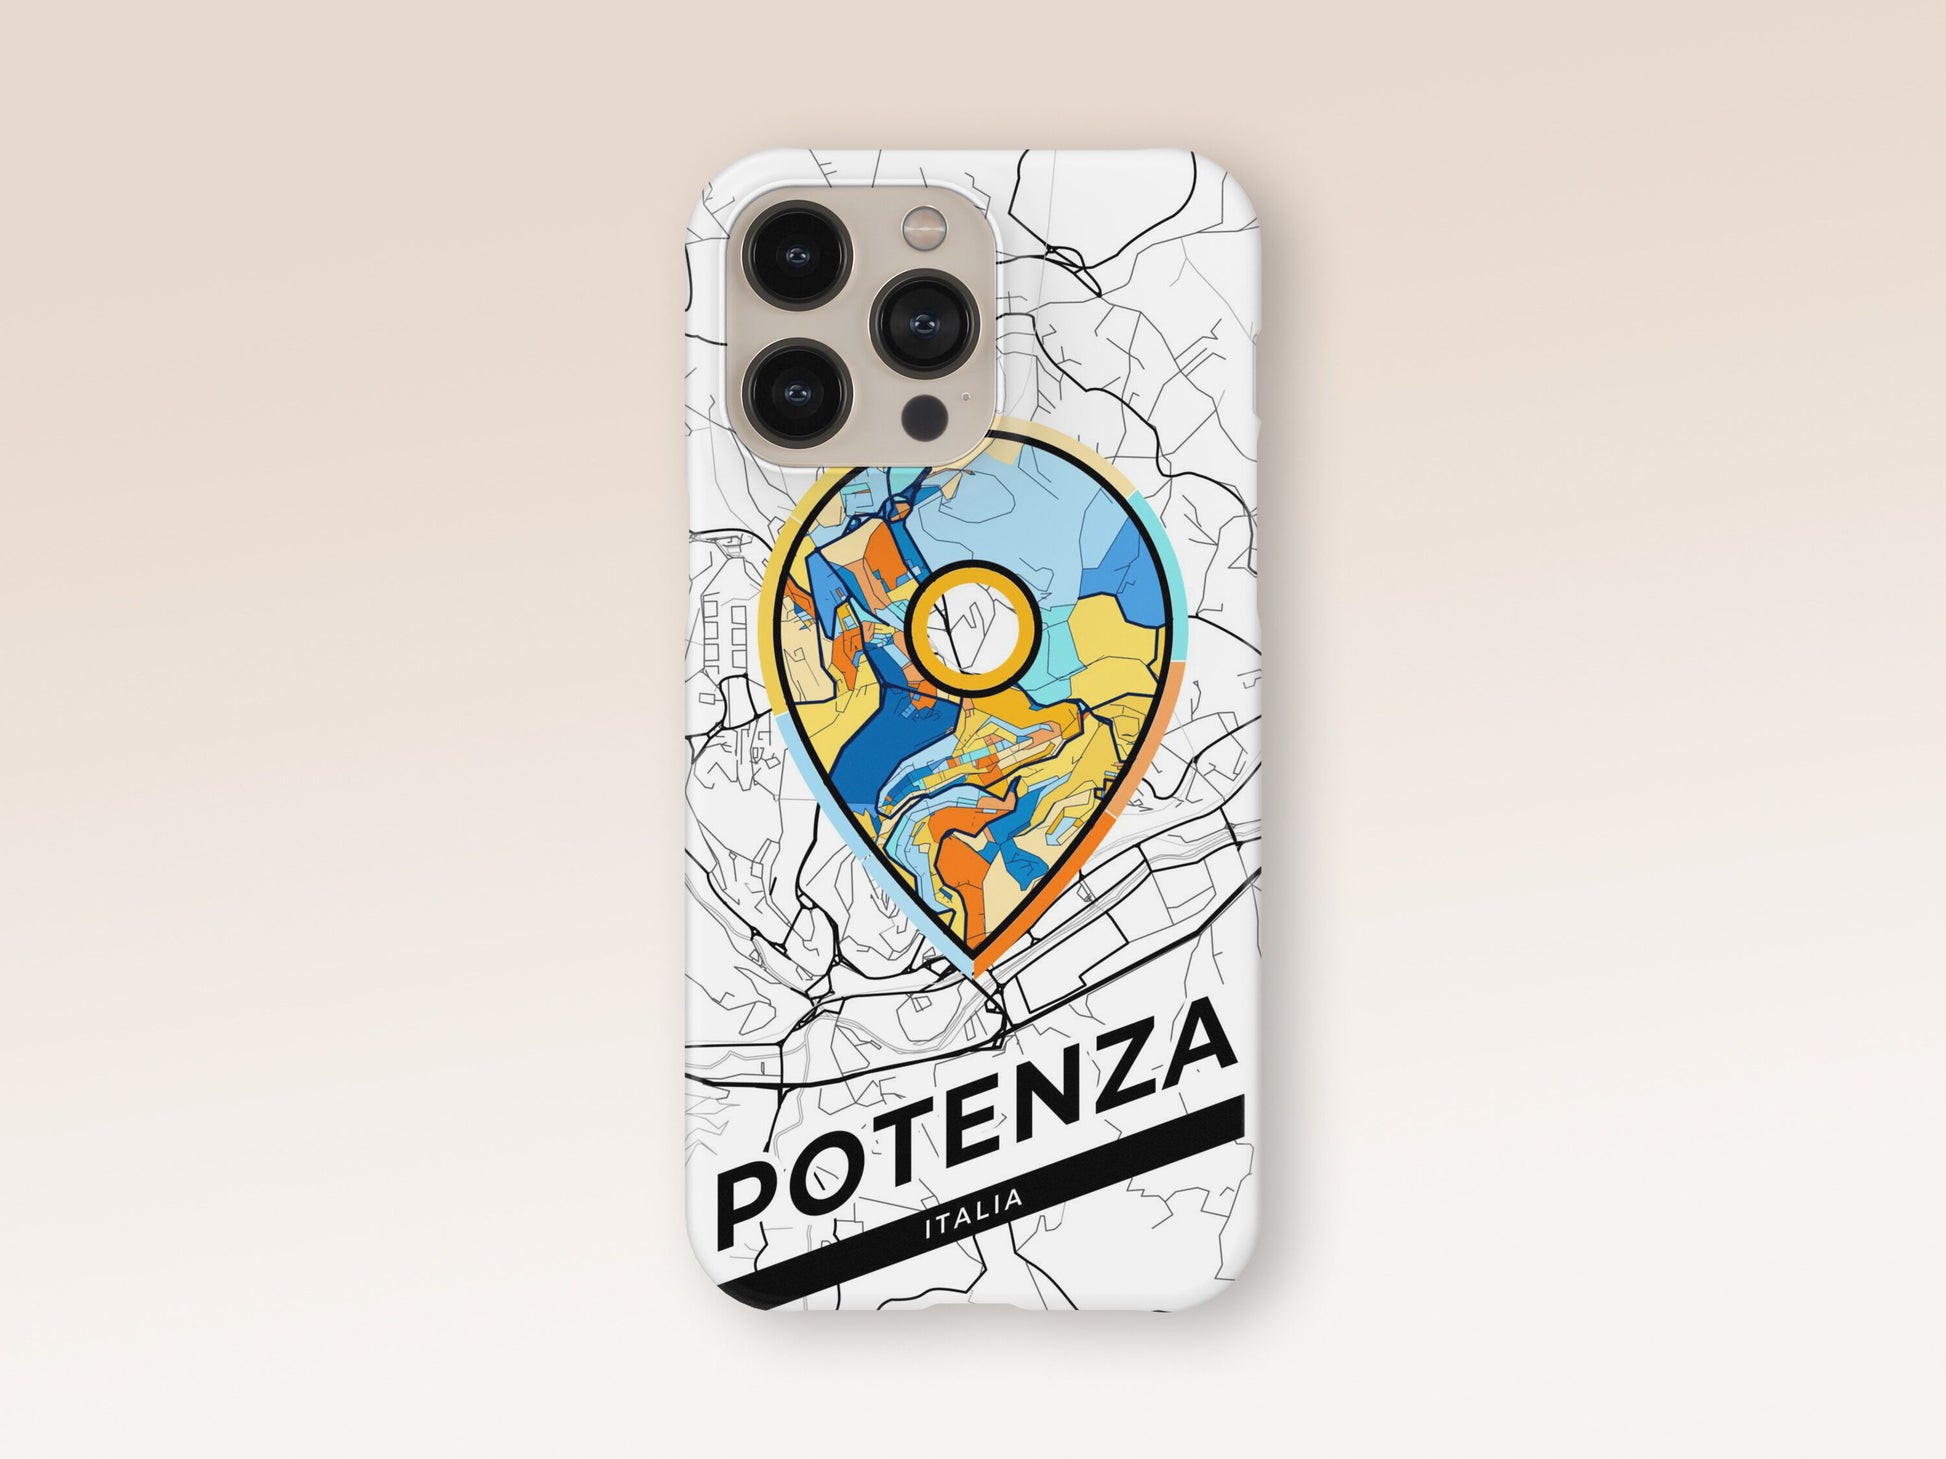 Potenza Italy slim phone case with colorful icon. Birthday, wedding or housewarming gift. Couple match cases. 1